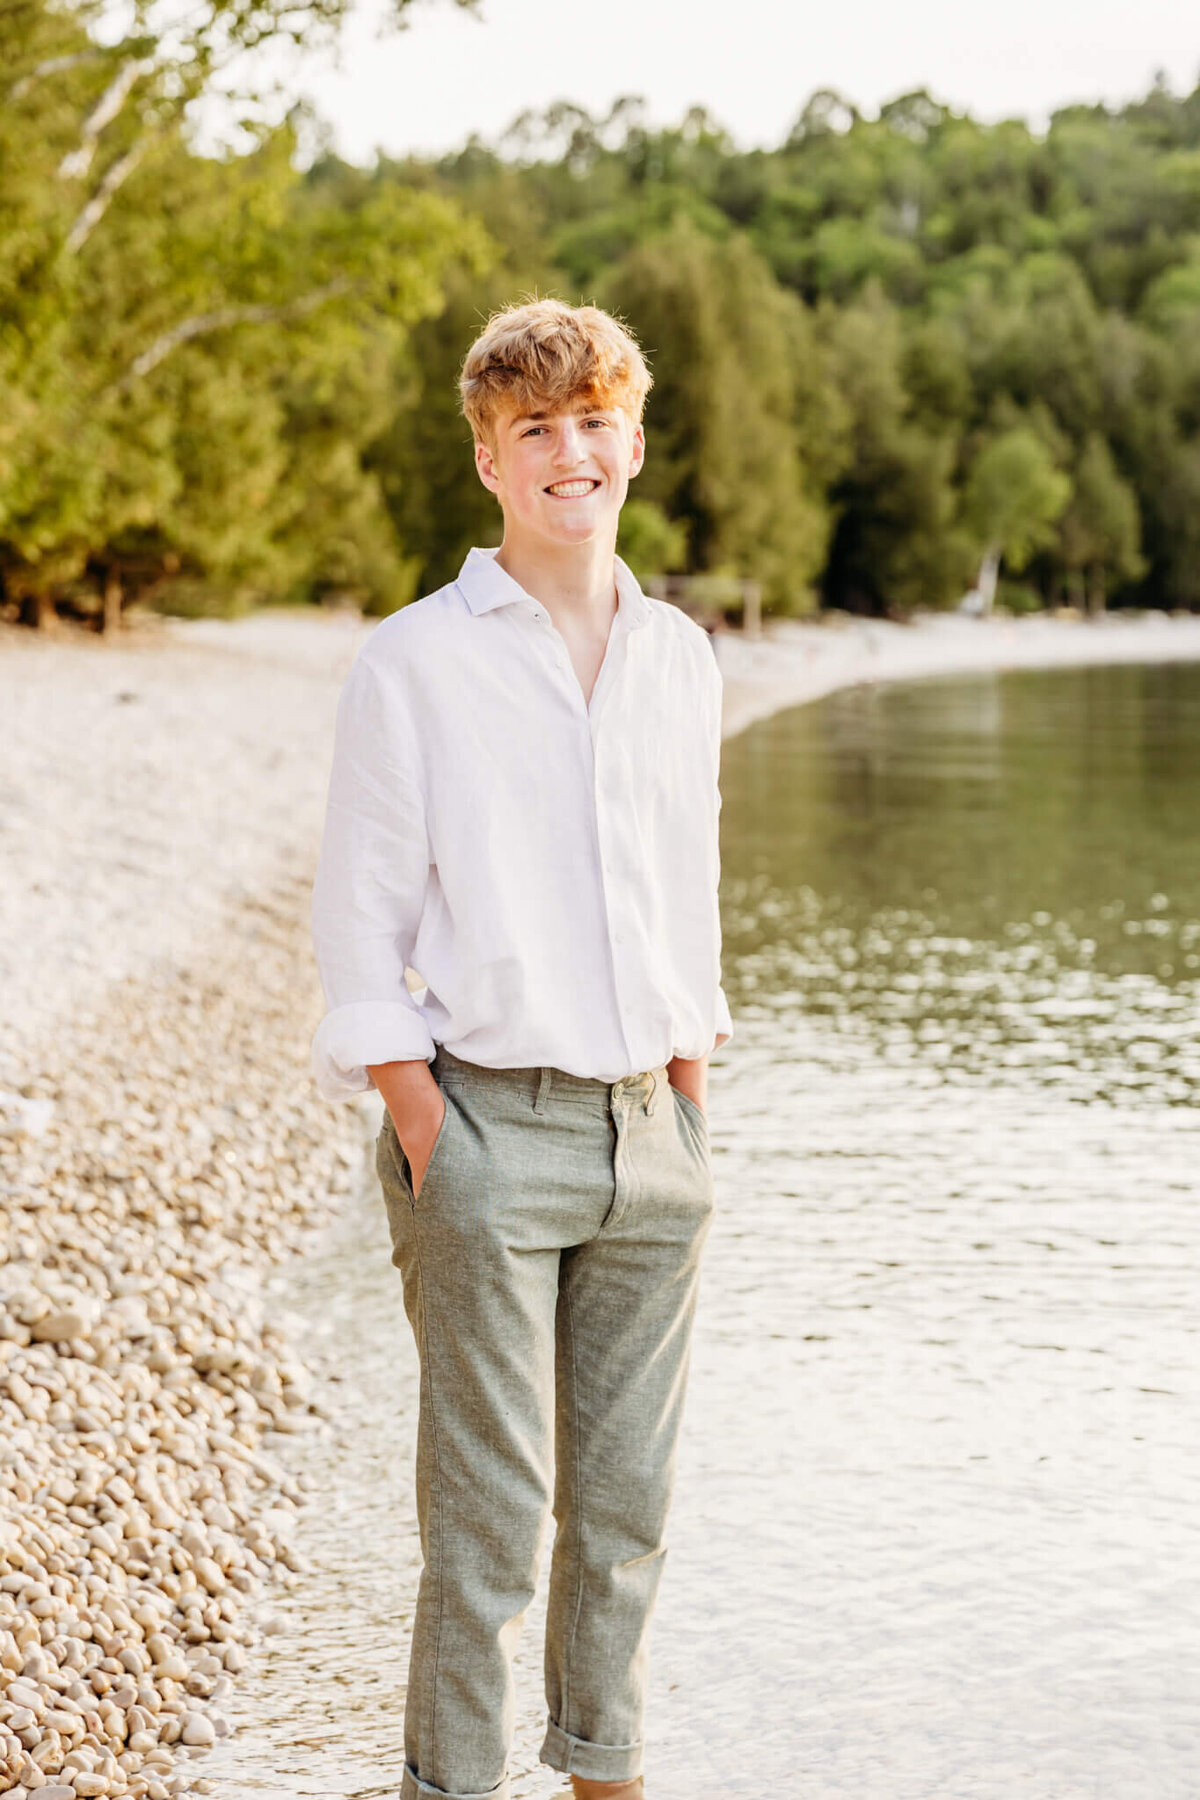 high school boy standing with hands in pockets in the lake